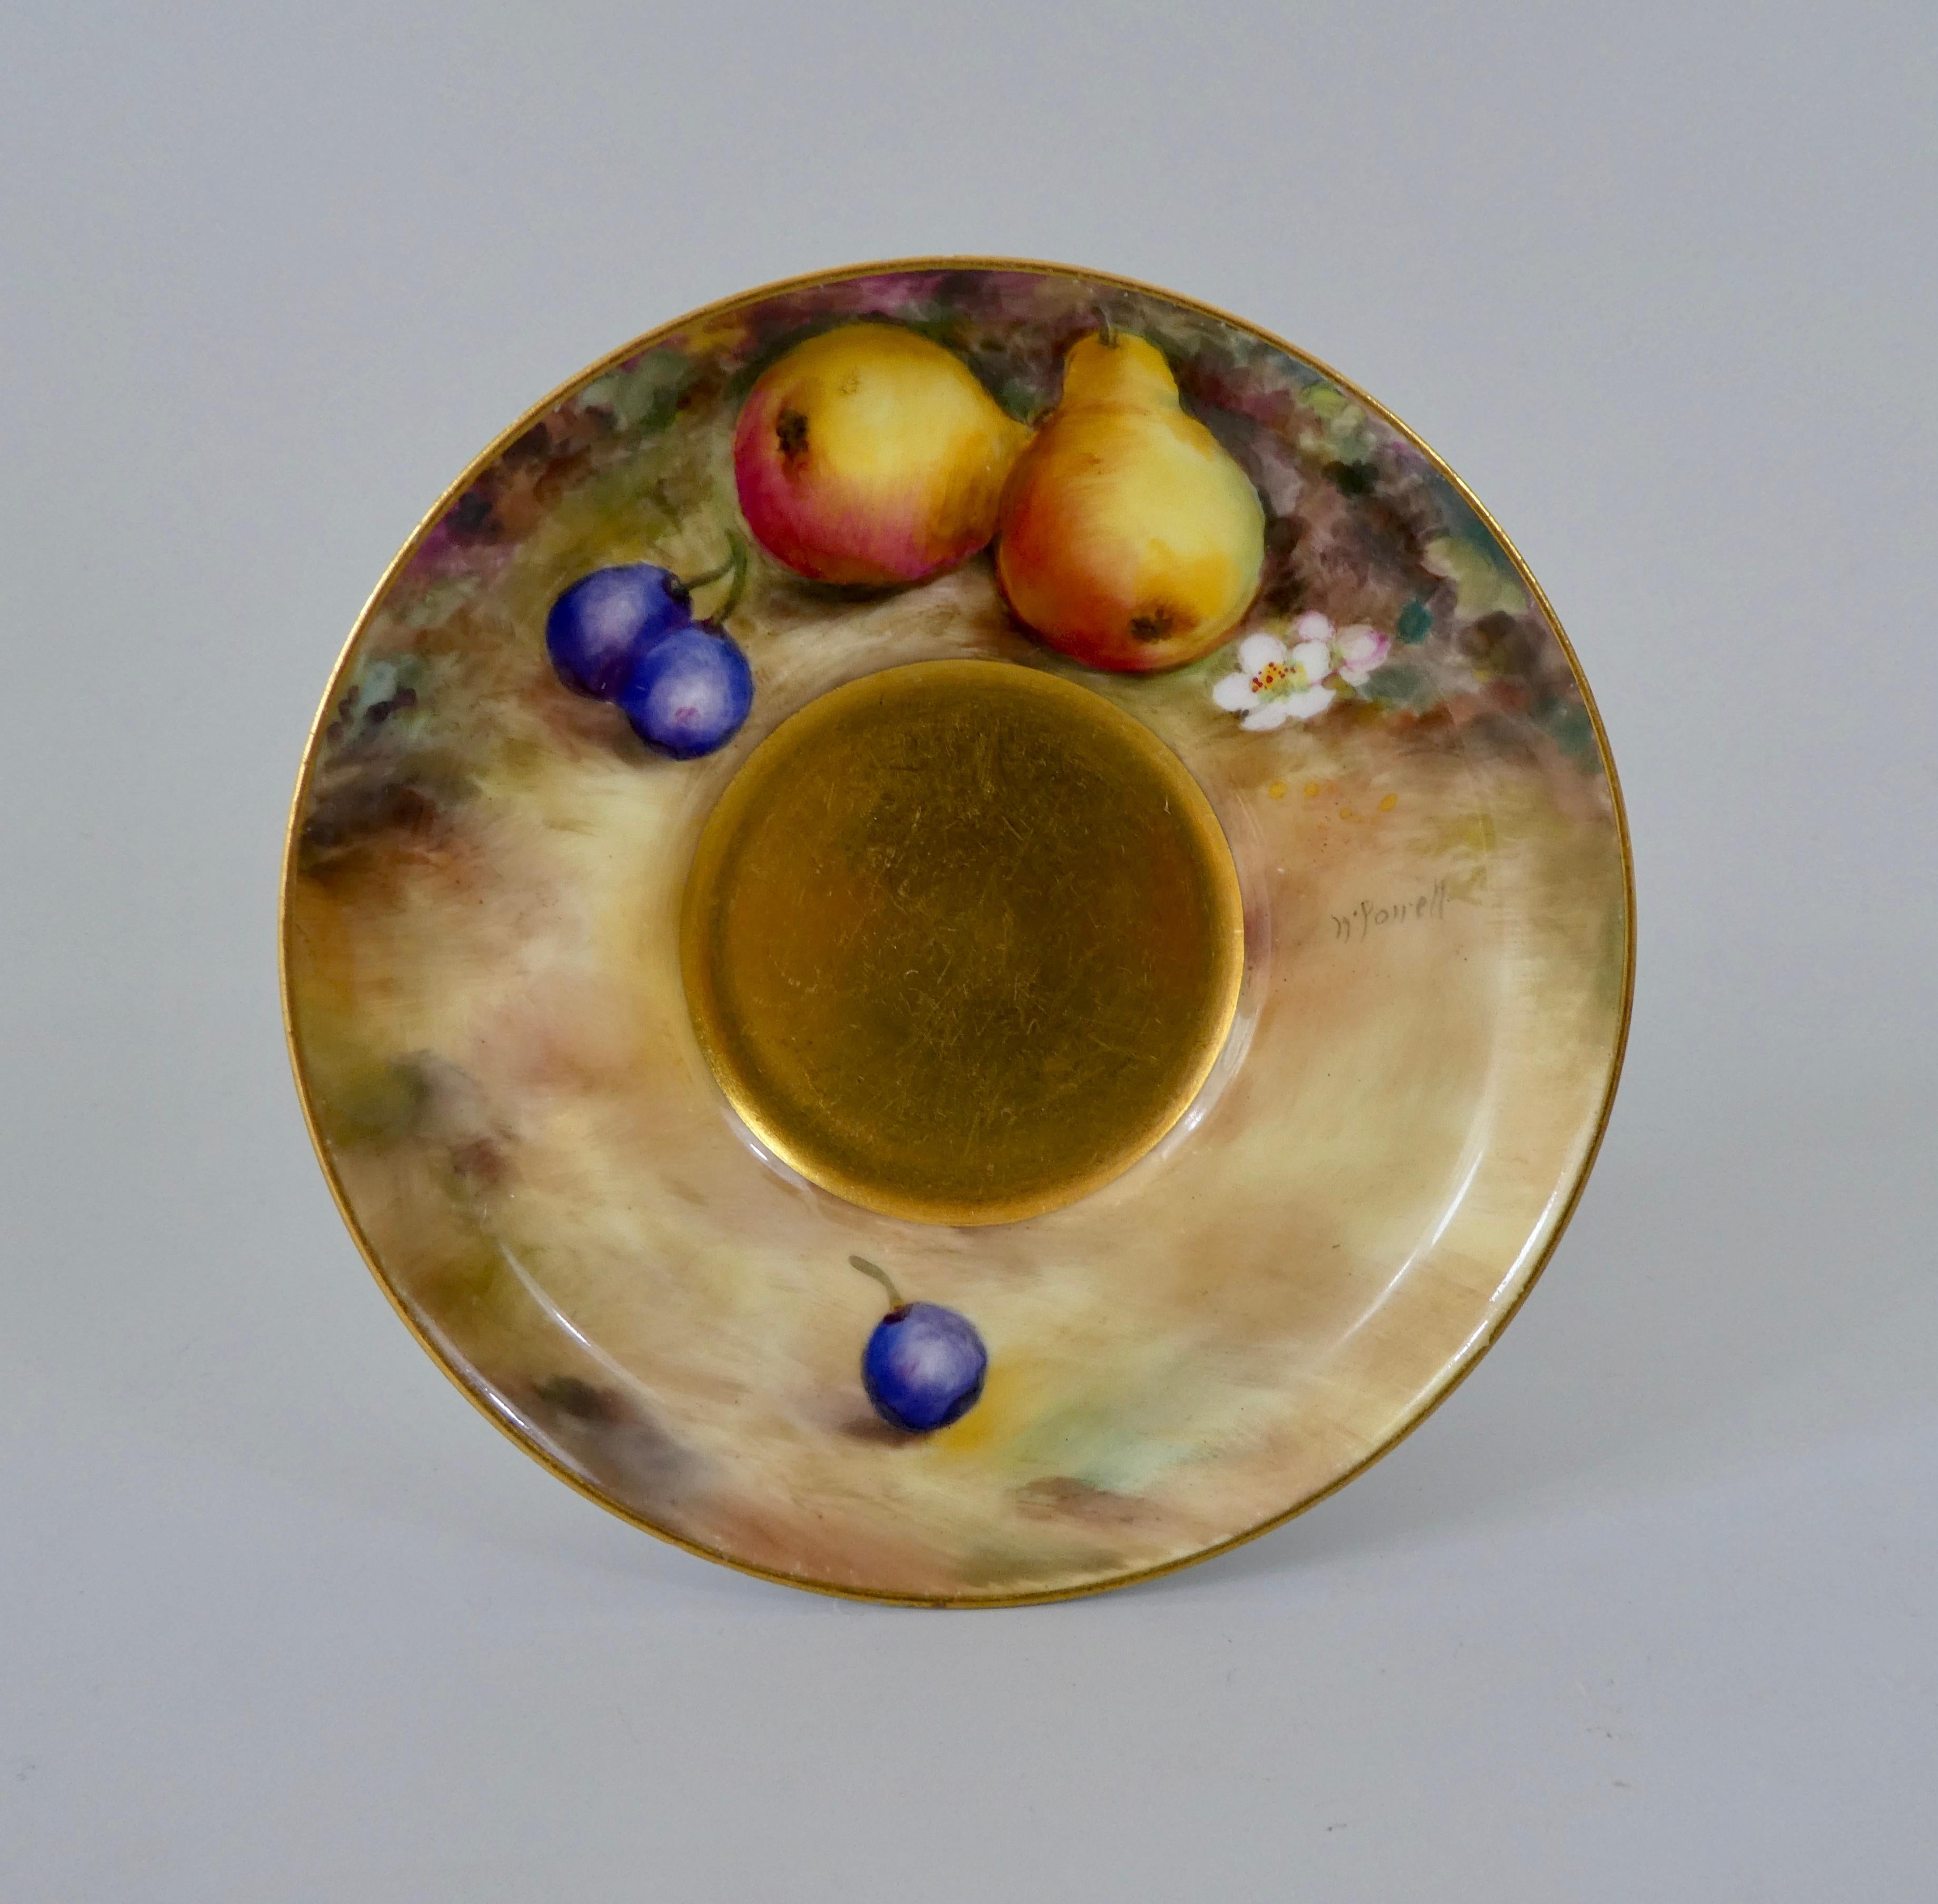 Royal Worcester porcelain Fruit coffee can and saucer, dated 1925, the can painted by Everet, the saucer by Powell. Both pieces finely painted with continuous studies of fruit on mossy banks. The interior of the can, and the handle completely